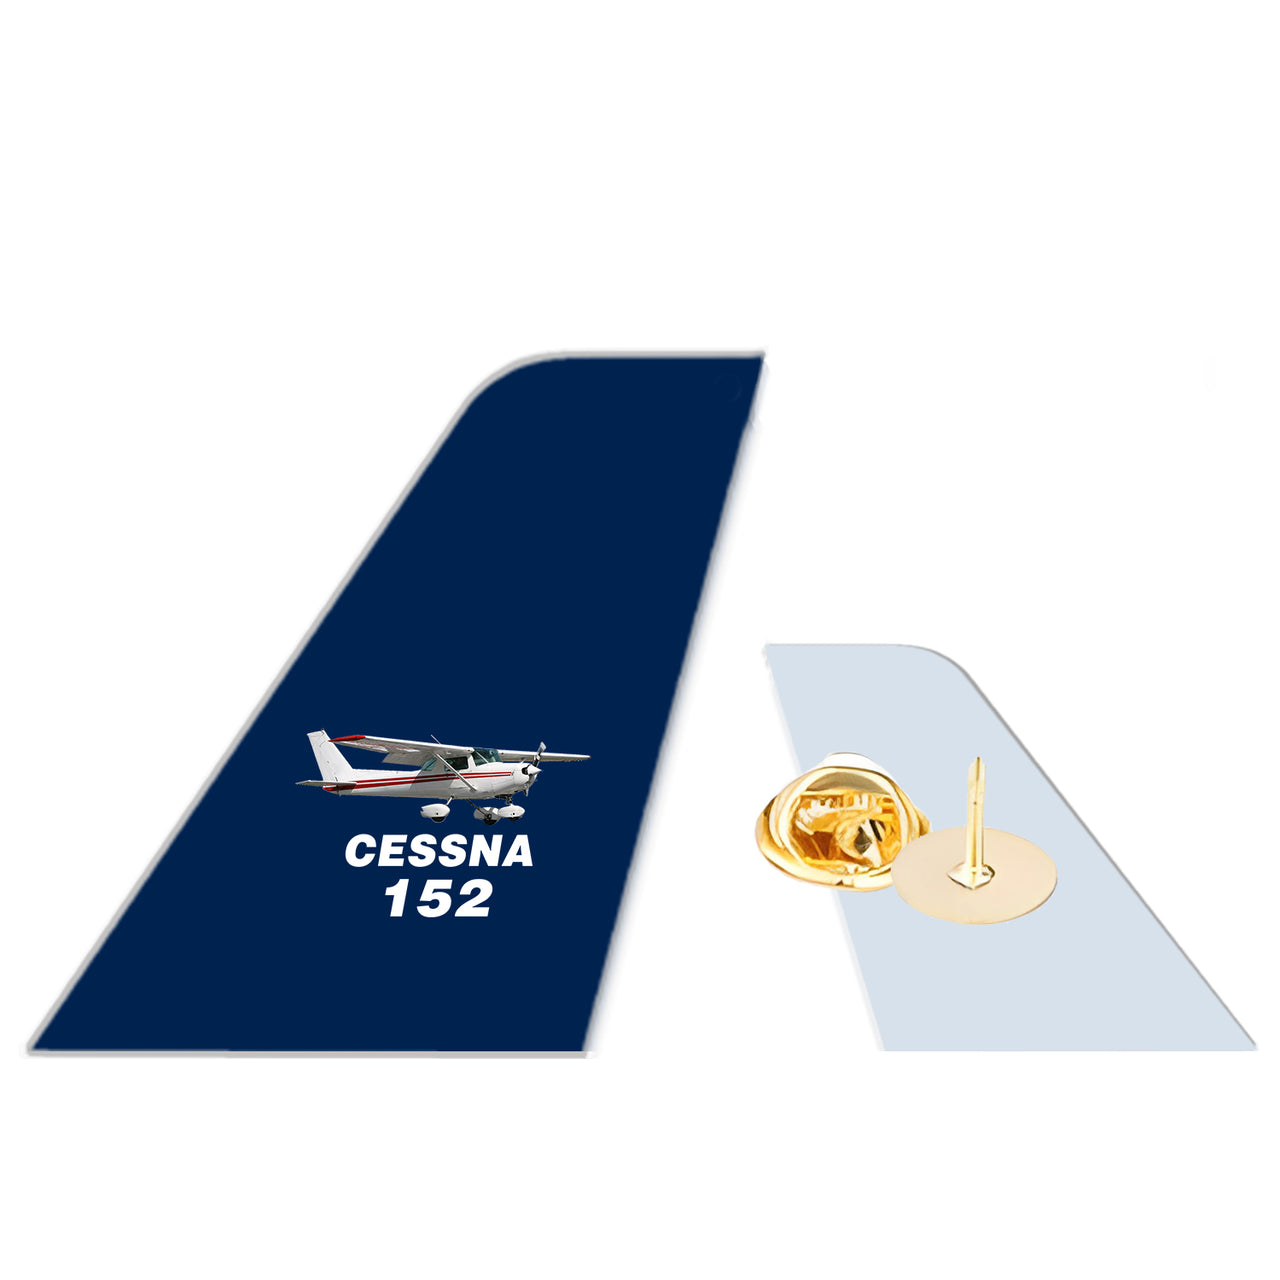 The Cessna 152 Designed Tail Shape Badges & Pins